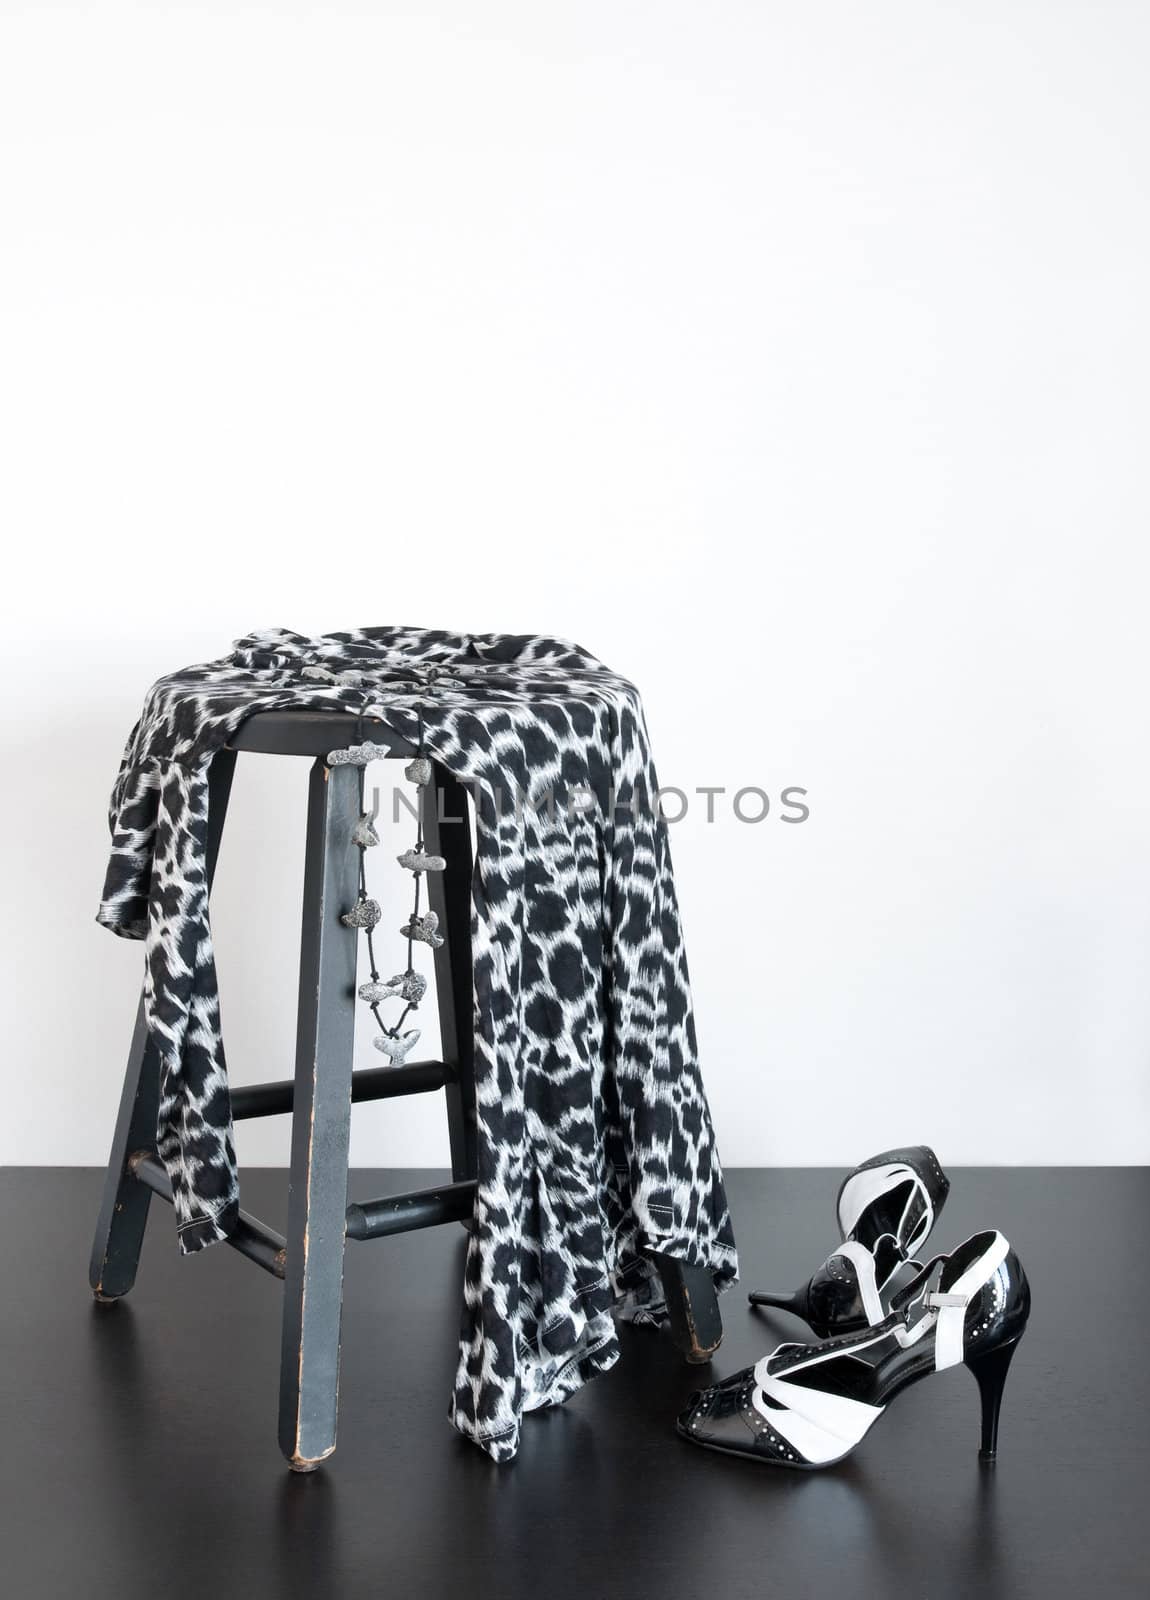 Black and white shoes and fashionable dress on old wooden stool.